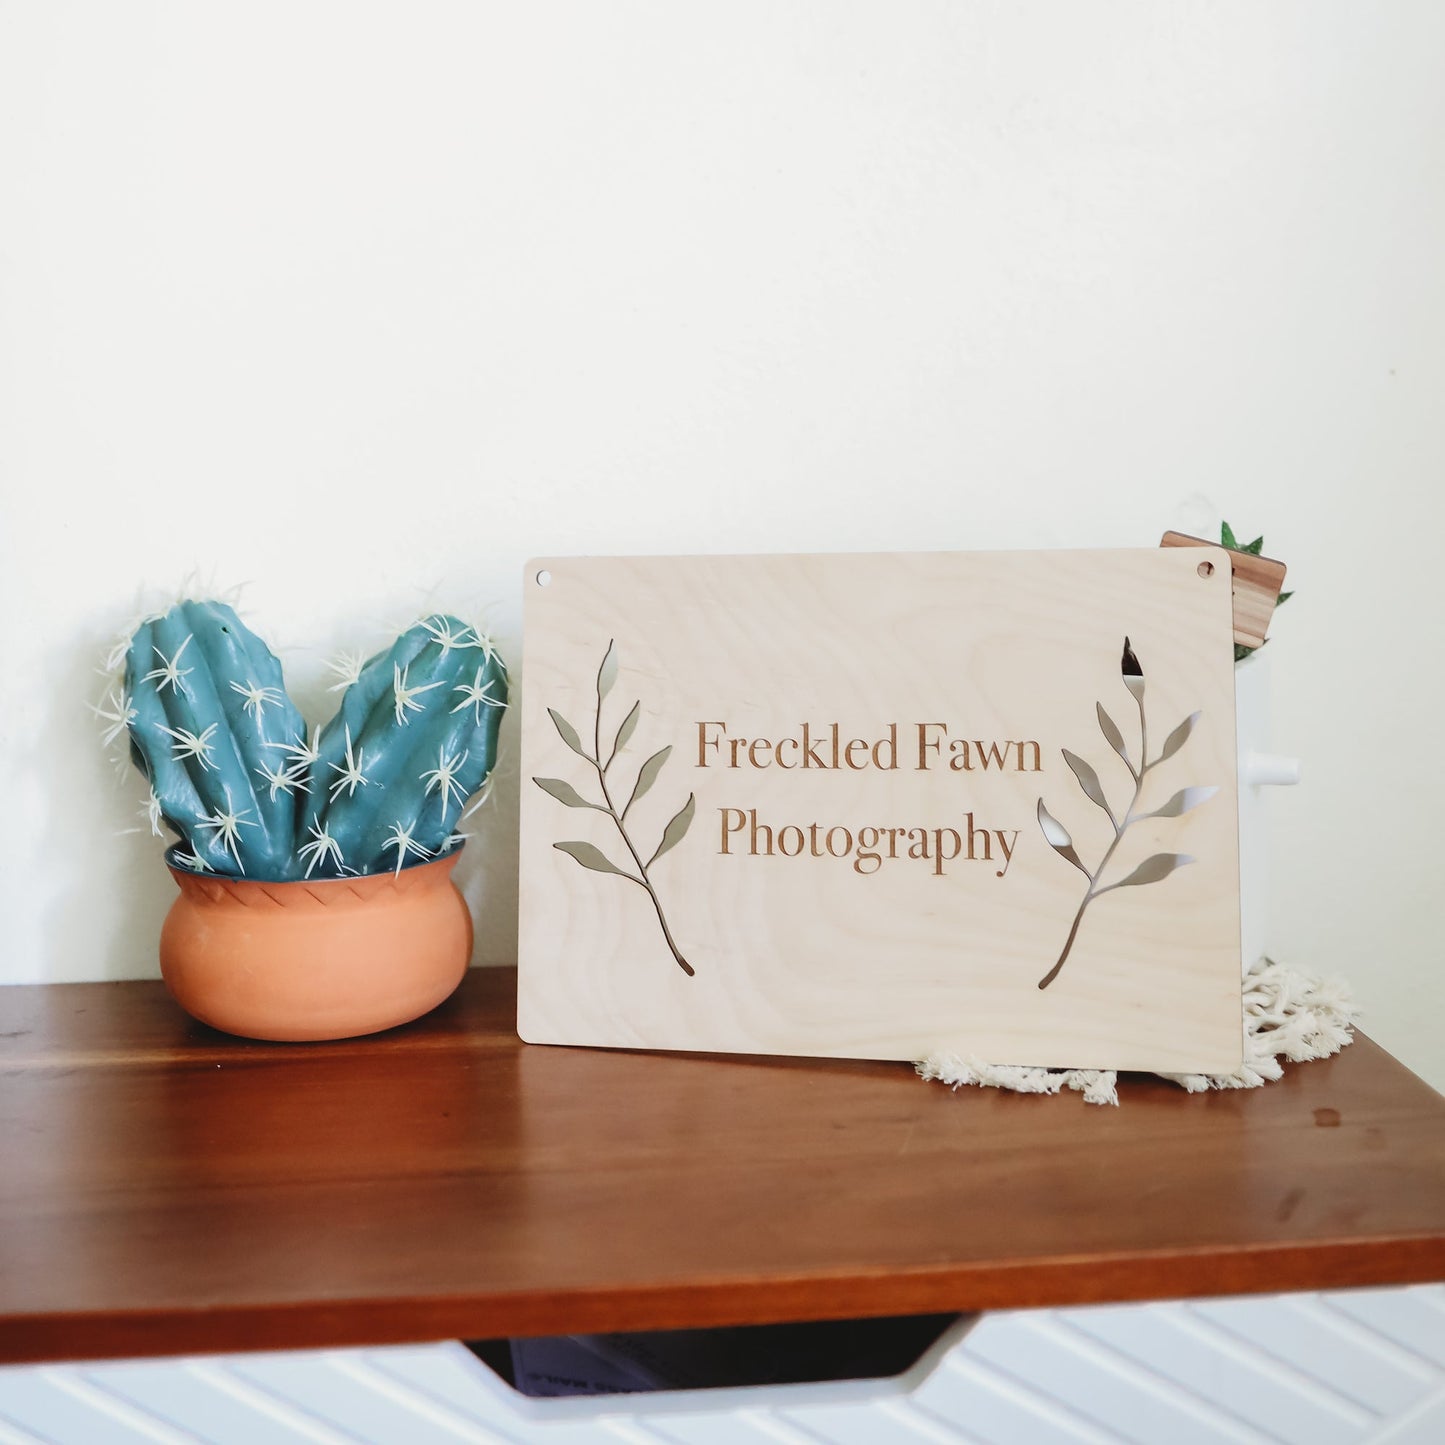 Custom sign for business - Freckled Fawn Photography birch plywood - laser cut by LeeMo Designs in Bend Oregon